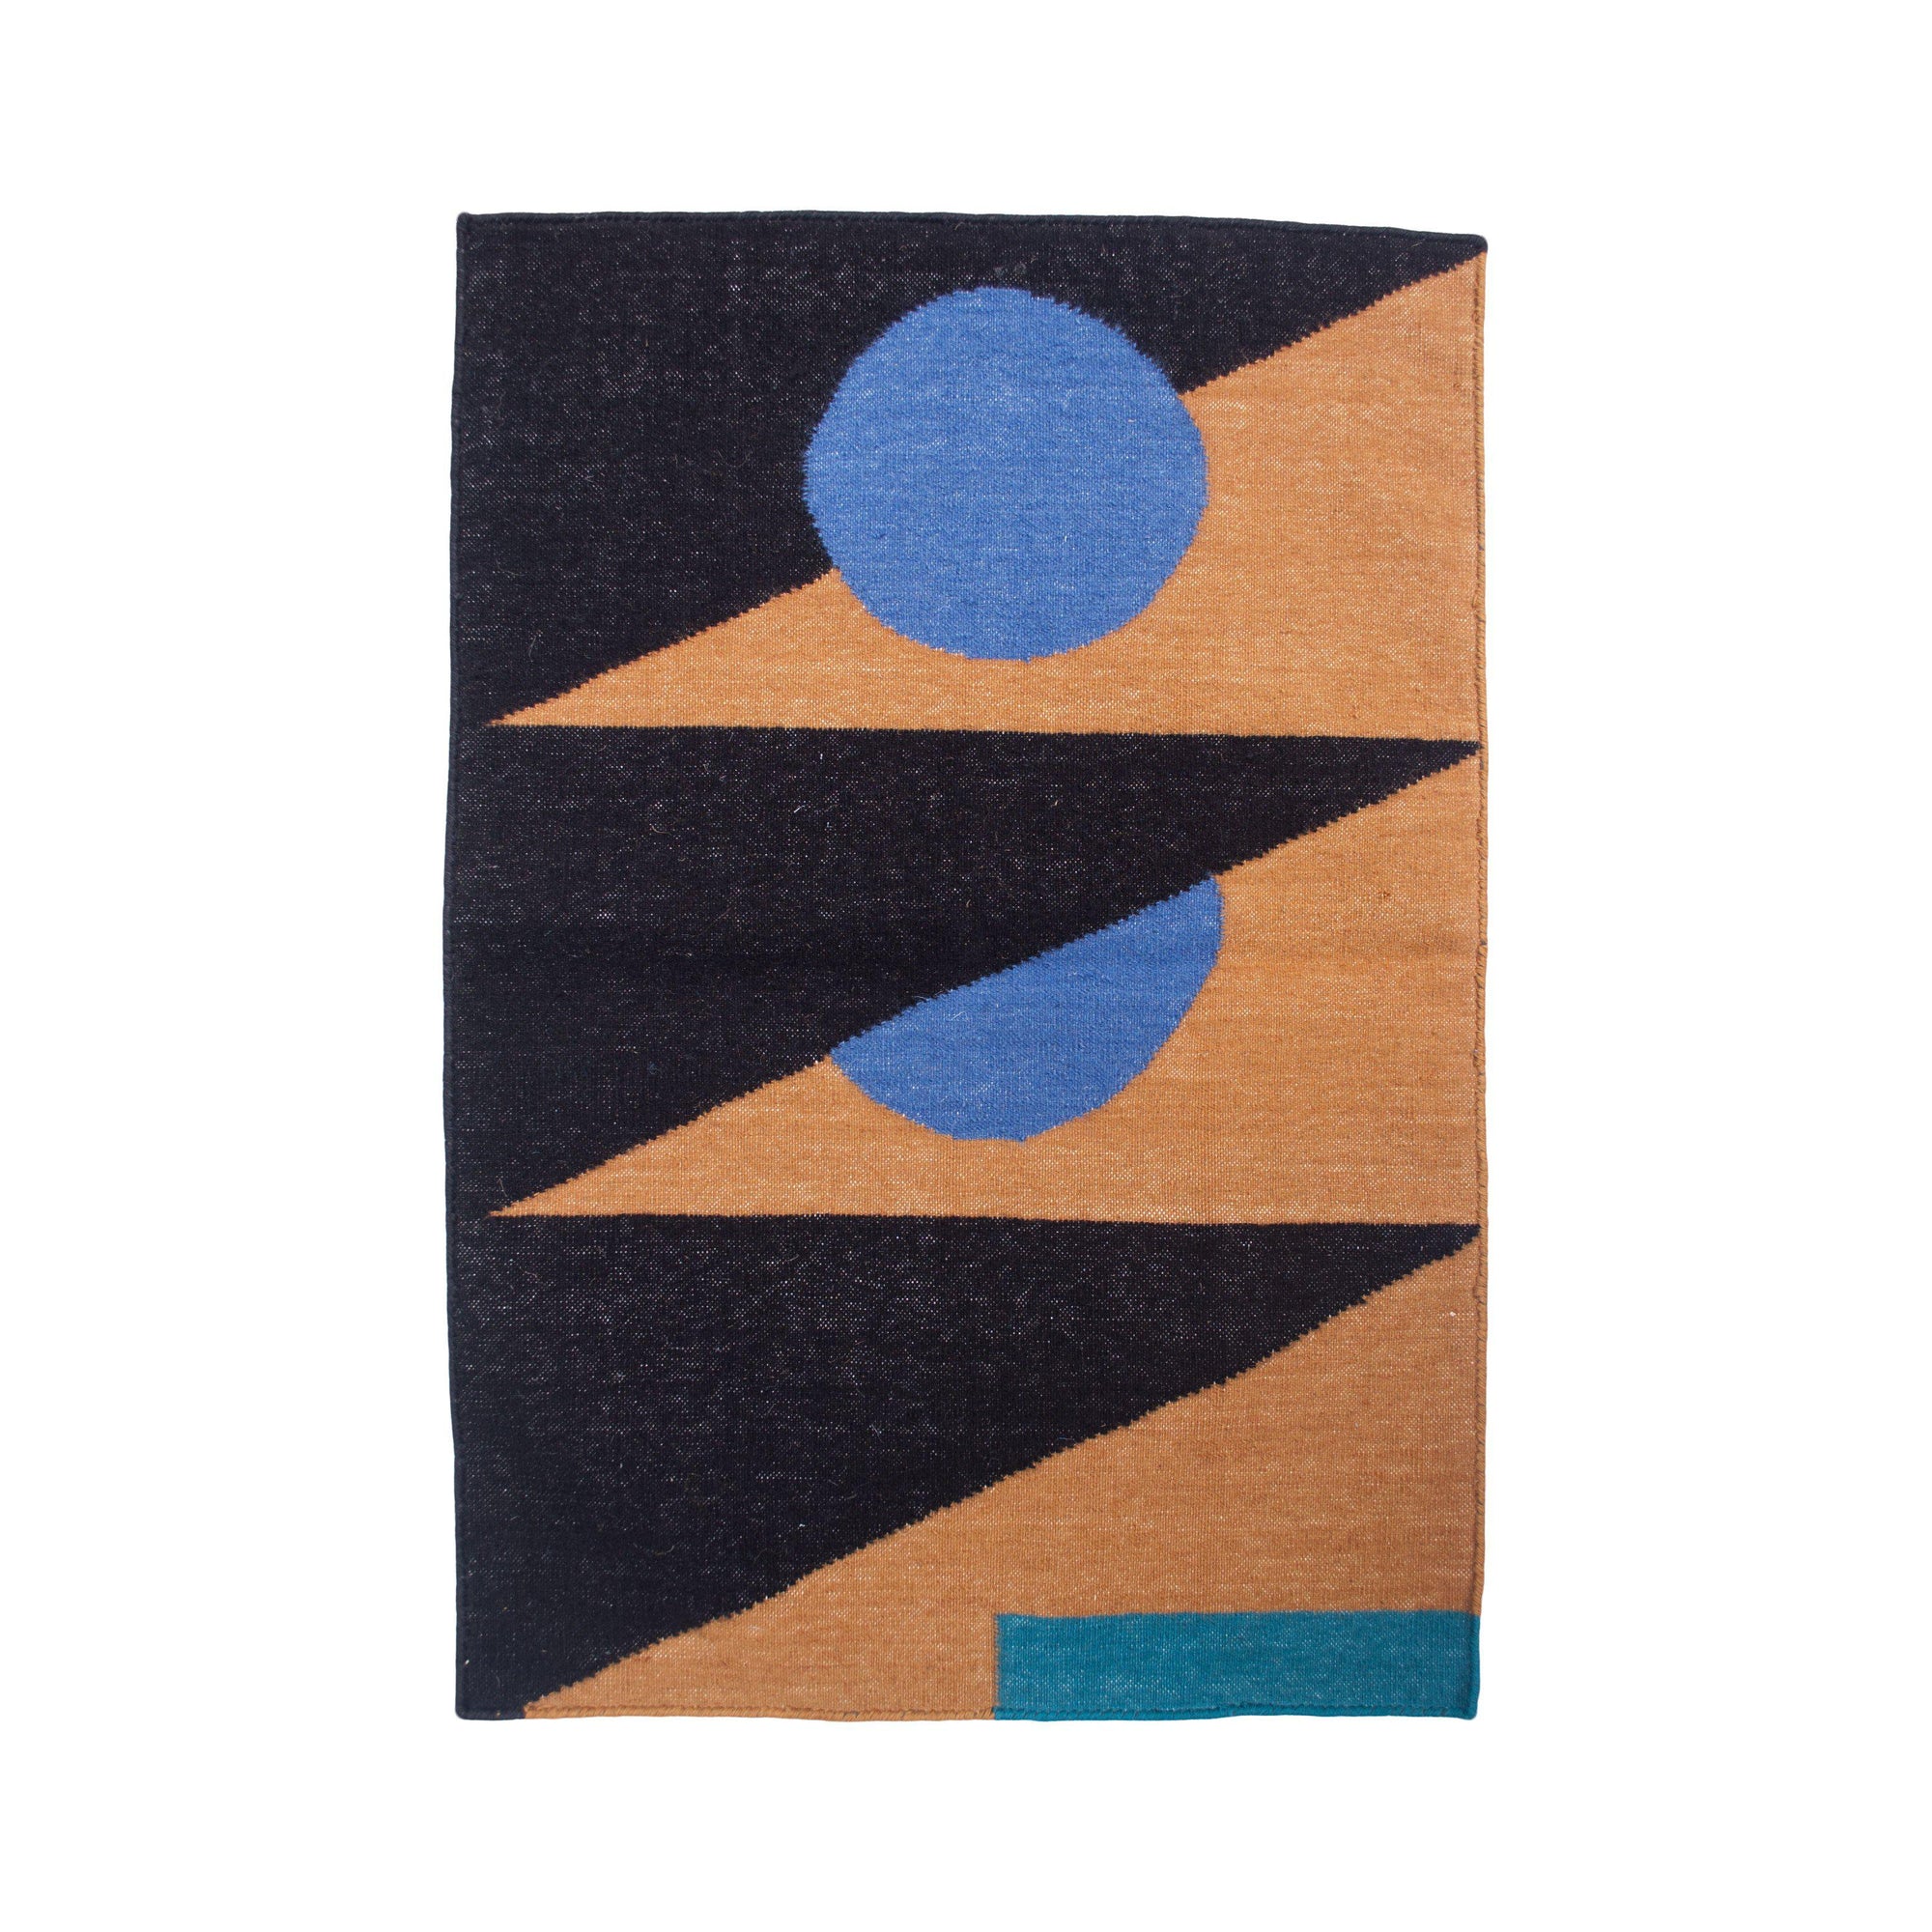 Rugs by Roo | Leah Singh Vera Triangle Rug-H16VER04